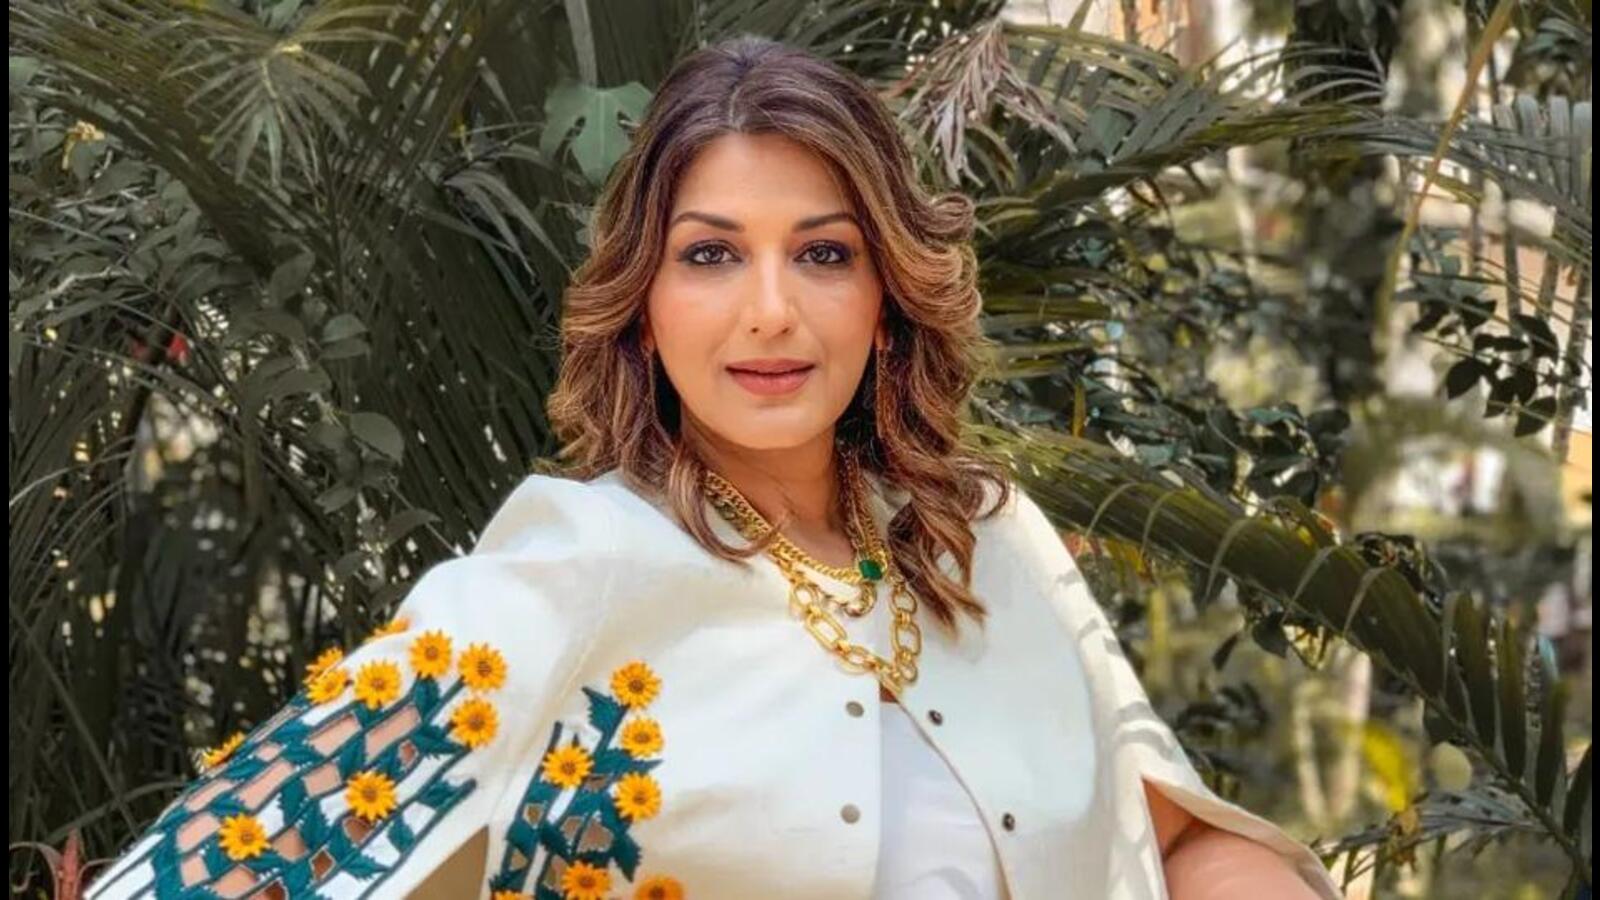 Sonali Bendre to make OTT debut with 'The Broken News'